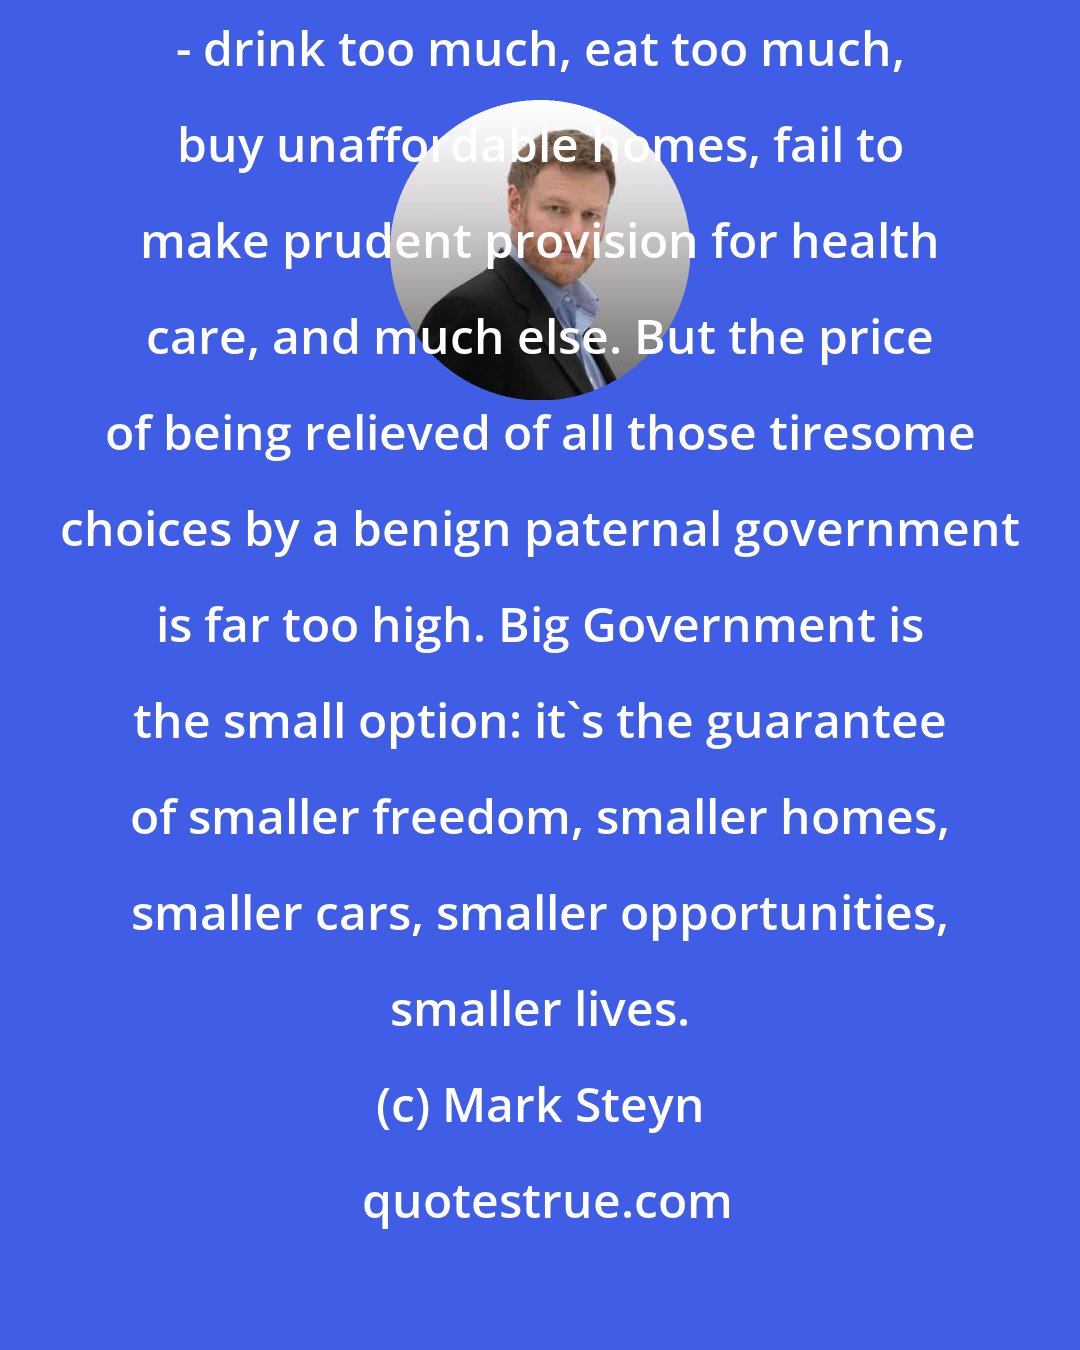 Mark Steyn: Freedom is messy. In free societies, people will fall through the cracks - drink too much, eat too much, buy unaffordable homes, fail to make prudent provision for health care, and much else. But the price of being relieved of all those tiresome choices by a benign paternal government is far too high. Big Government is the small option: it's the guarantee of smaller freedom, smaller homes, smaller cars, smaller opportunities, smaller lives.